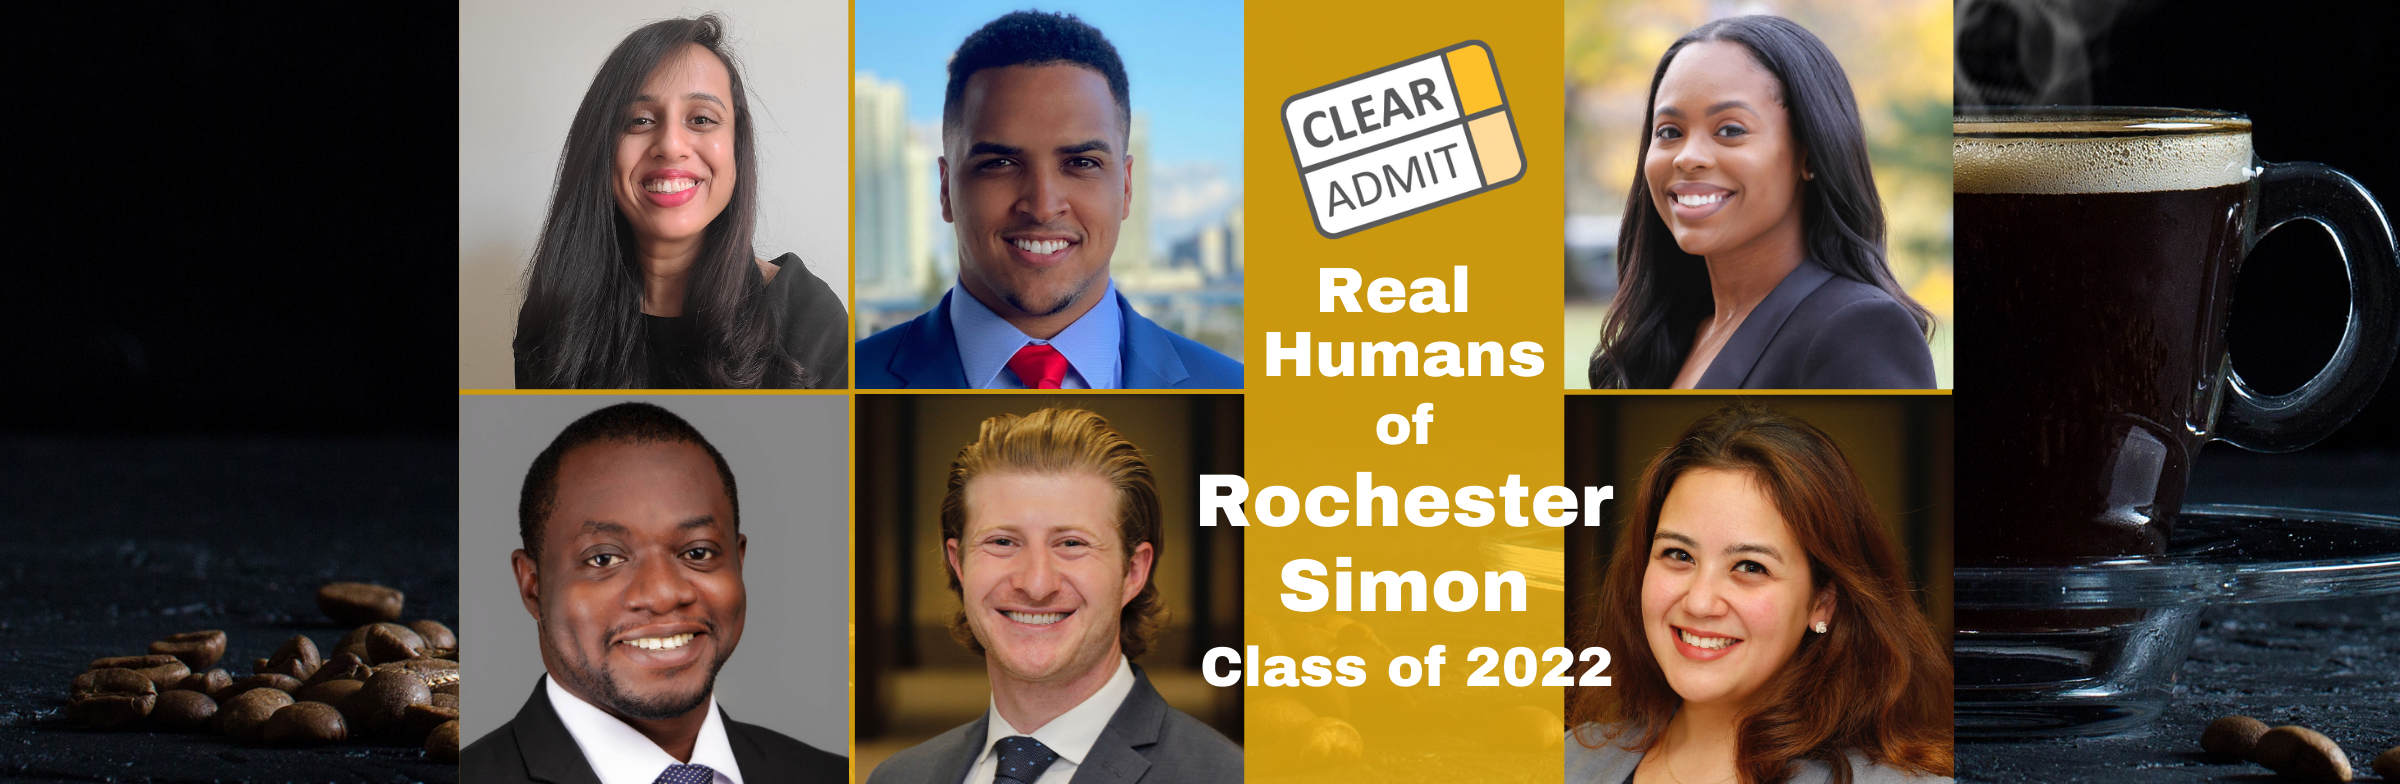 Image for Real Humans of Rochester Simon’s MBA Class of 2022